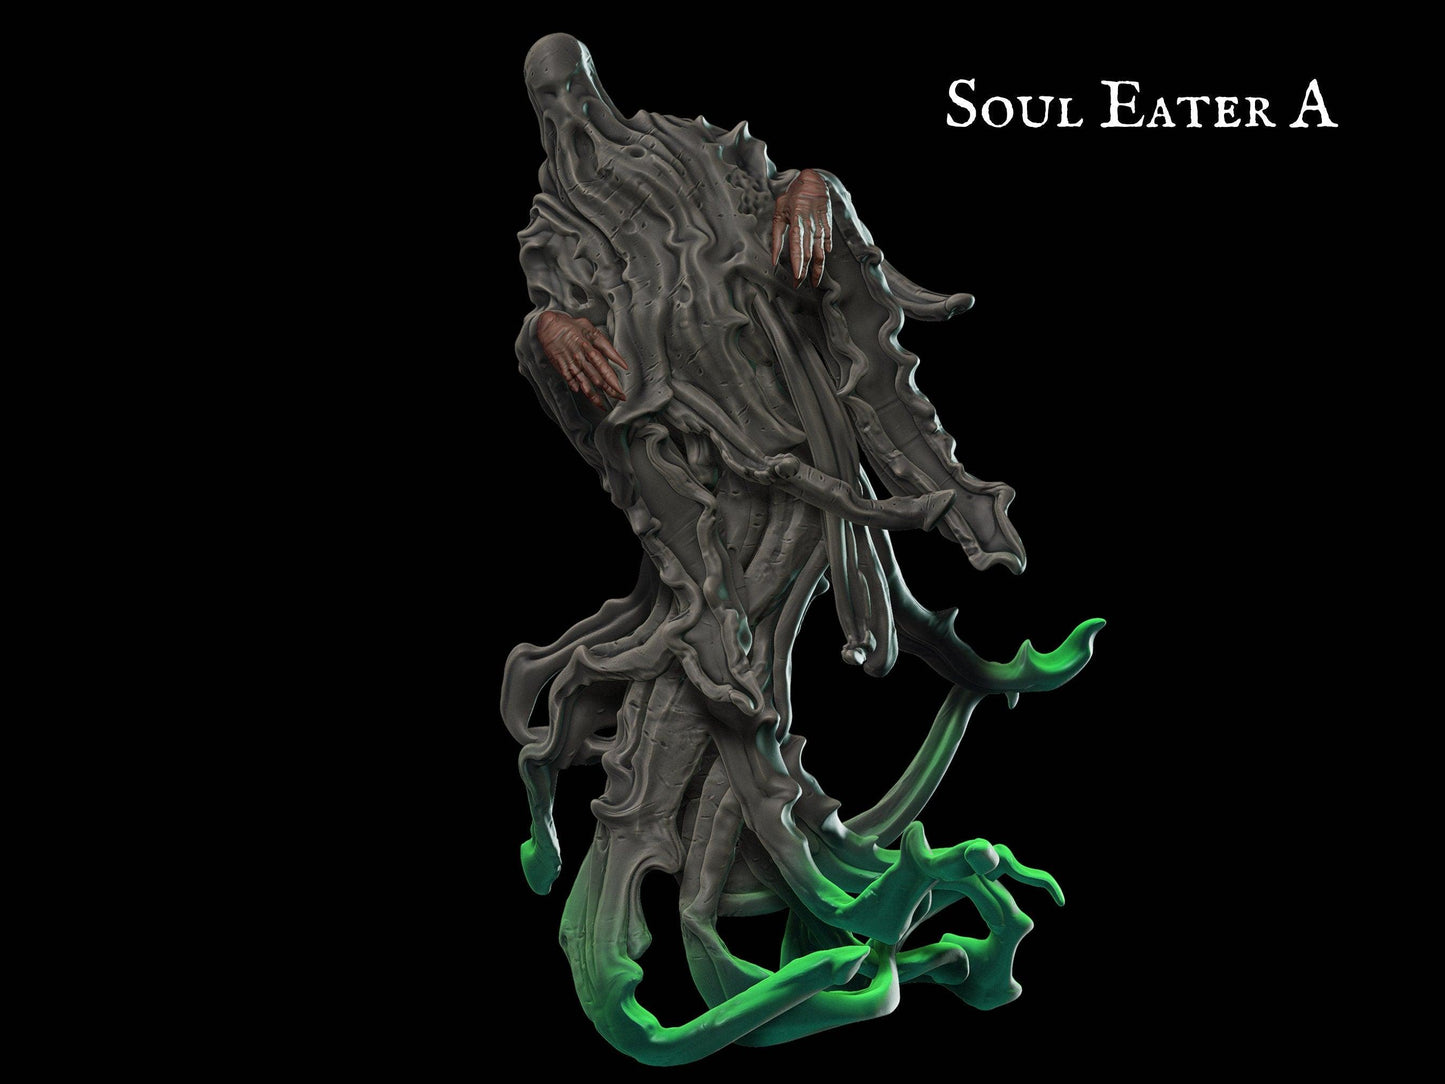 Soul Eater Miniature Monster Miniature dnd figure 28mm scale Tabletop gaming DnD Miniature Dungeons and Dragons, dnd 5e dungeon master gift - Plague Miniatures shop for DnD Miniatures